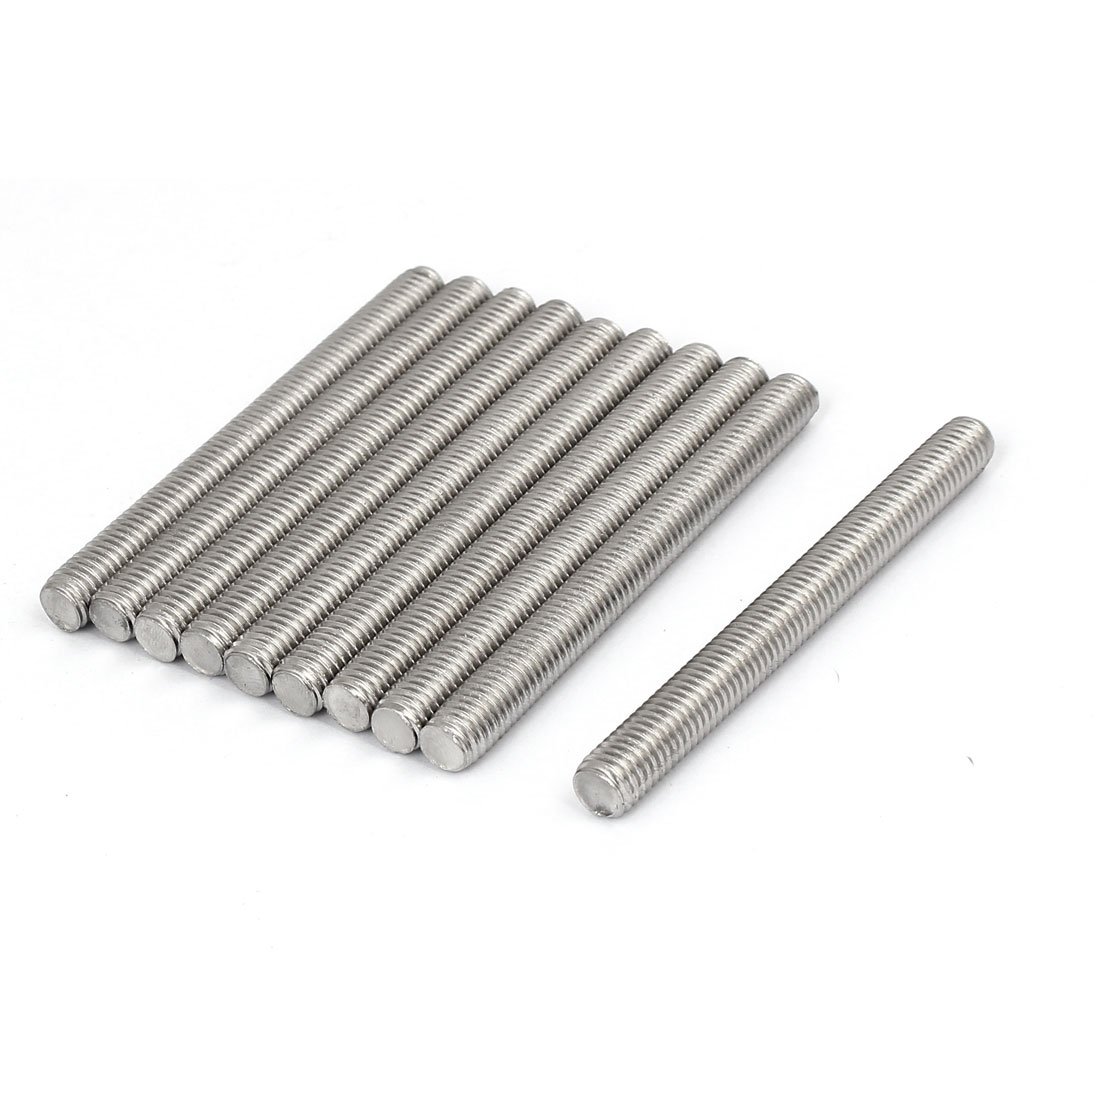 Steel Fully Threaded Rods and Studs